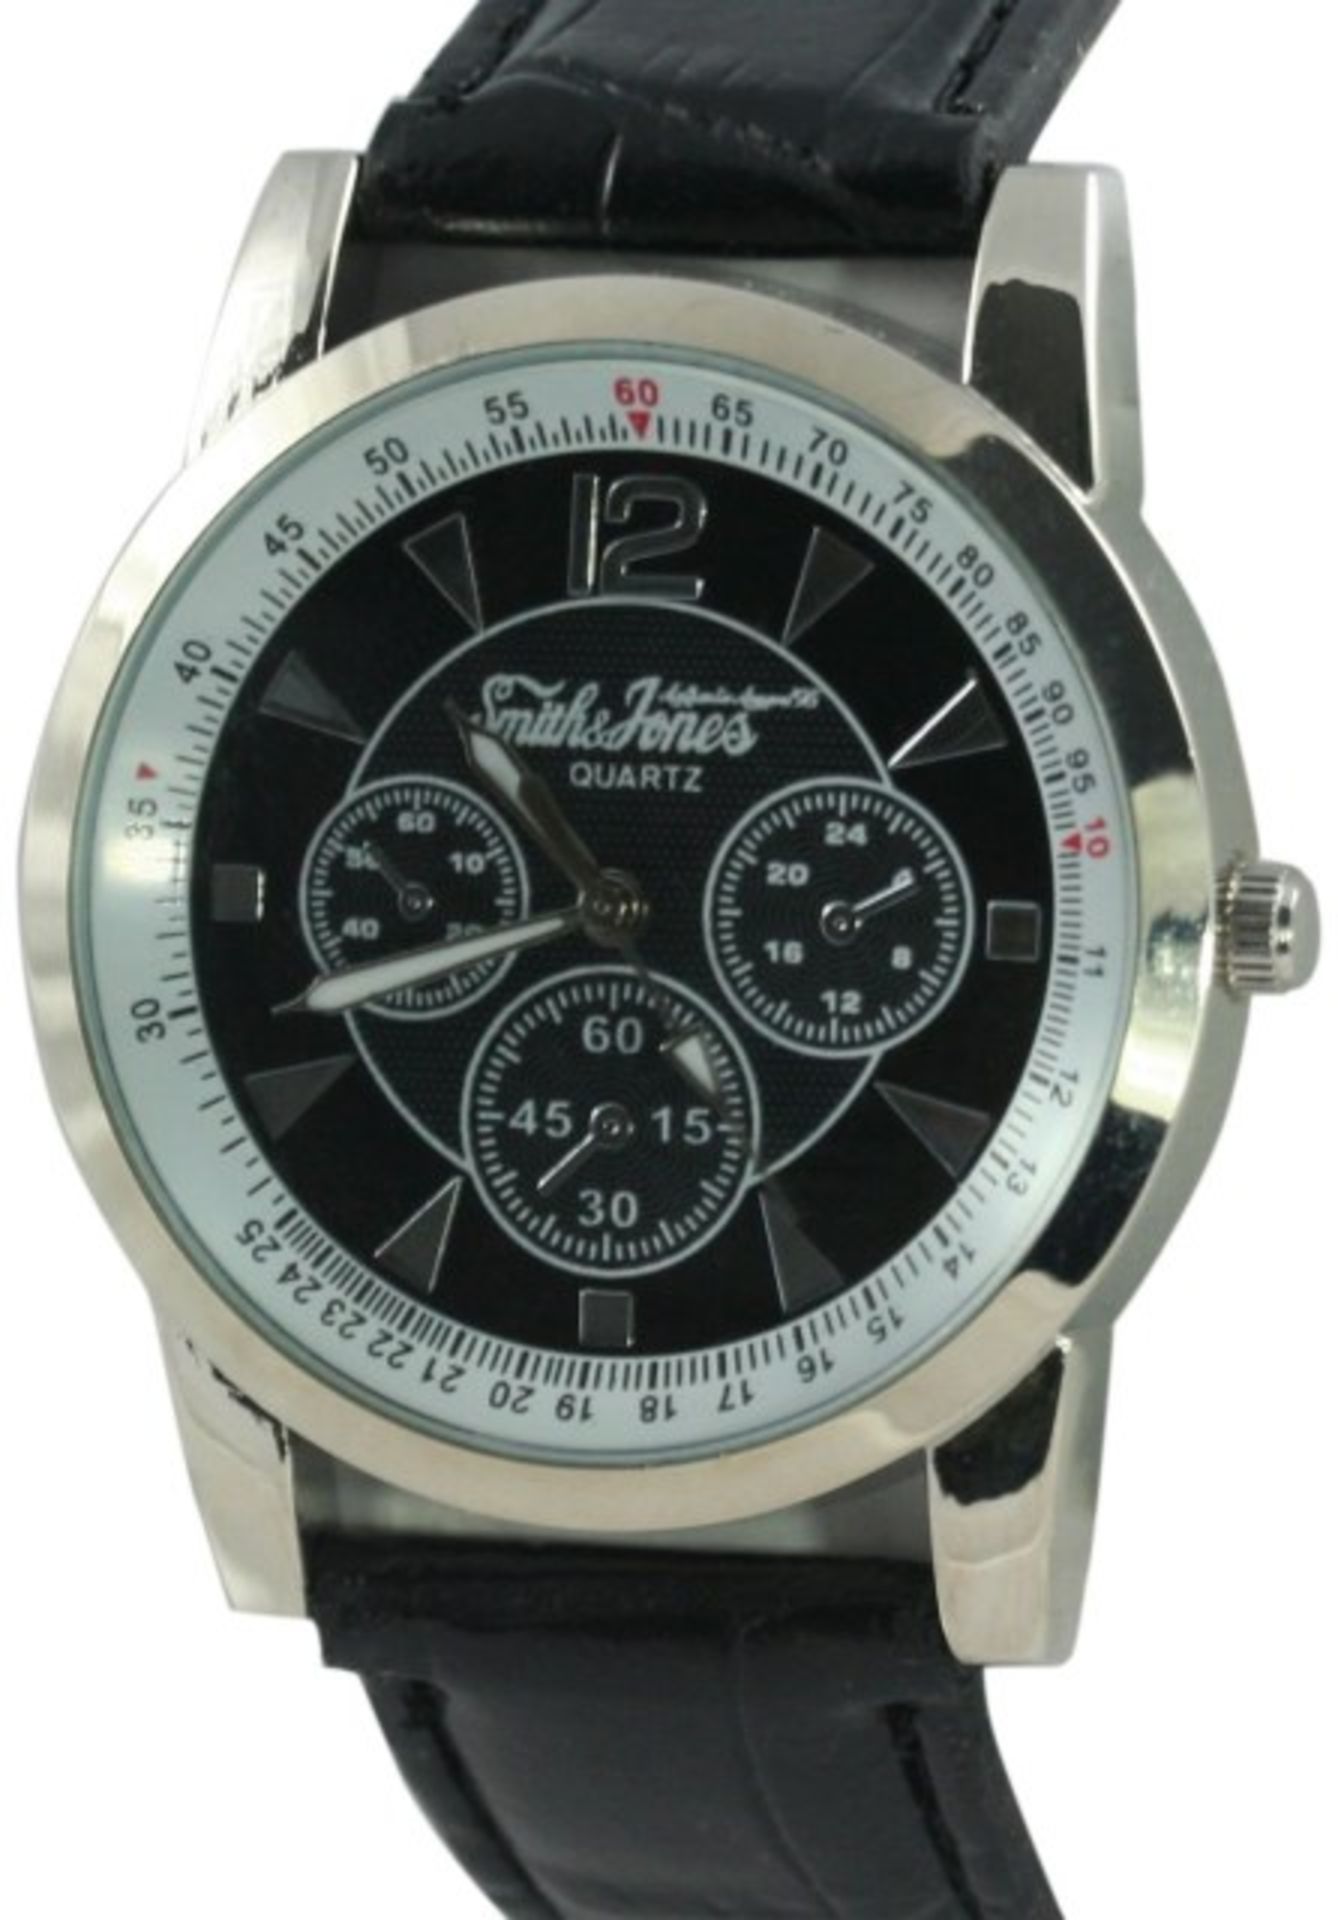 V Brand New Gents Smith & Jones Black Strap Black Face Three Dial Watch X 2 YOUR BID PRICE TO BE